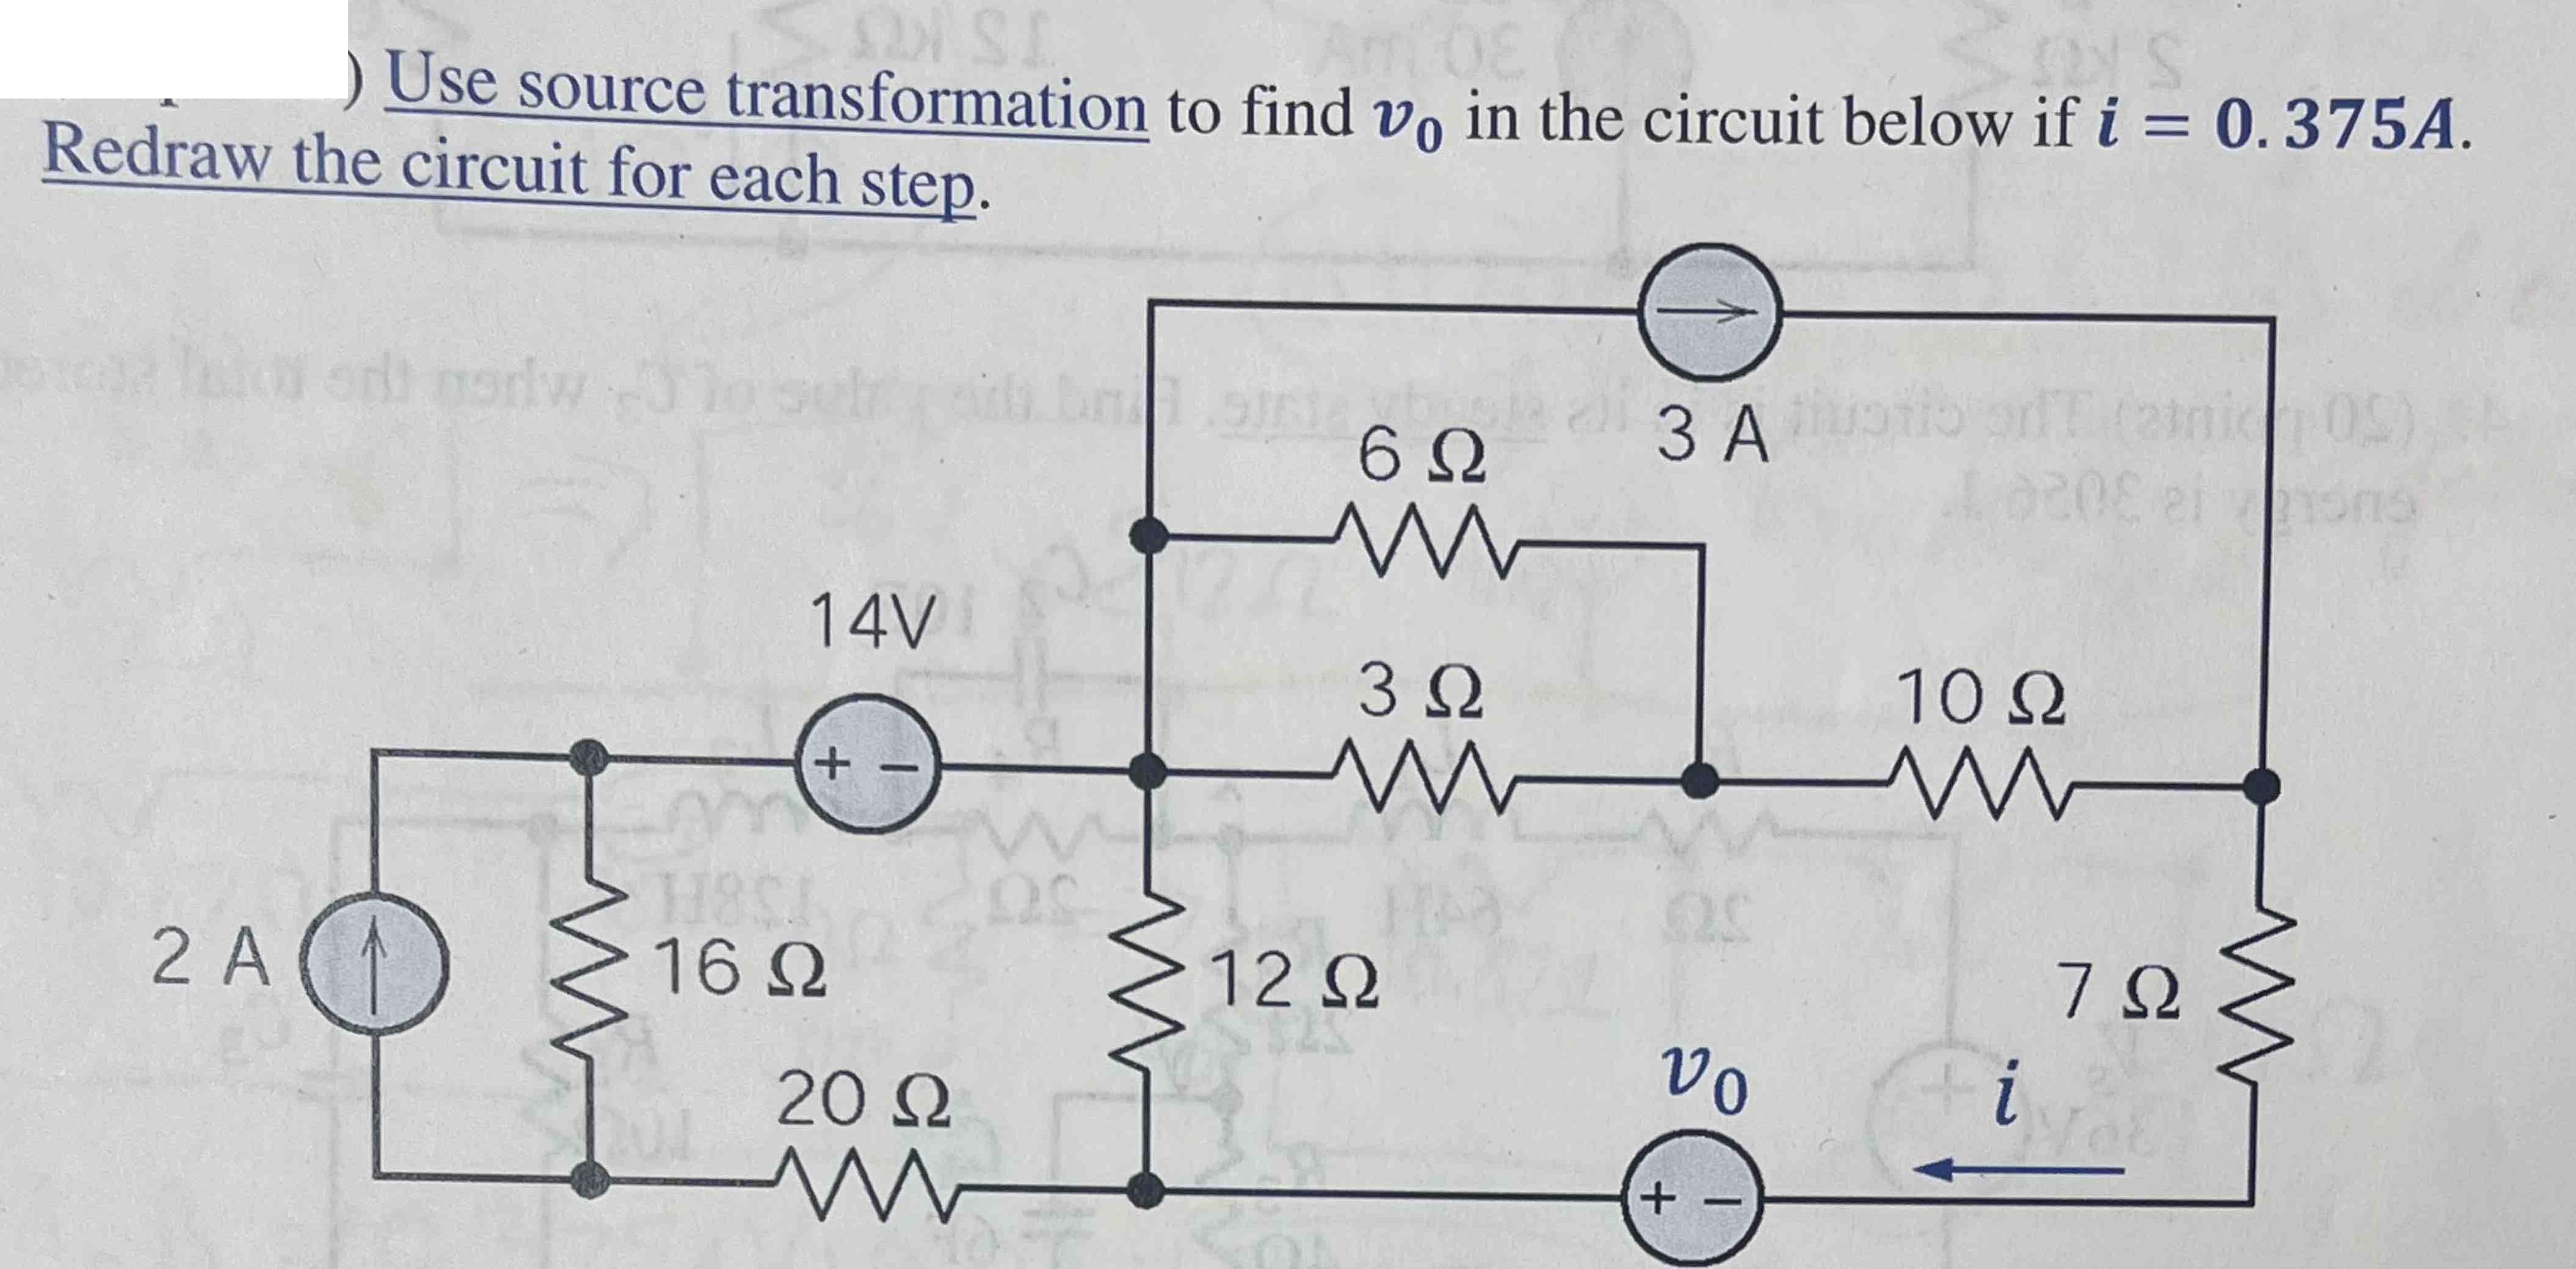 SI OE SYS ) Use source transformation to find vo in the circuit below if i = 0.375A. Redraw the circuit for